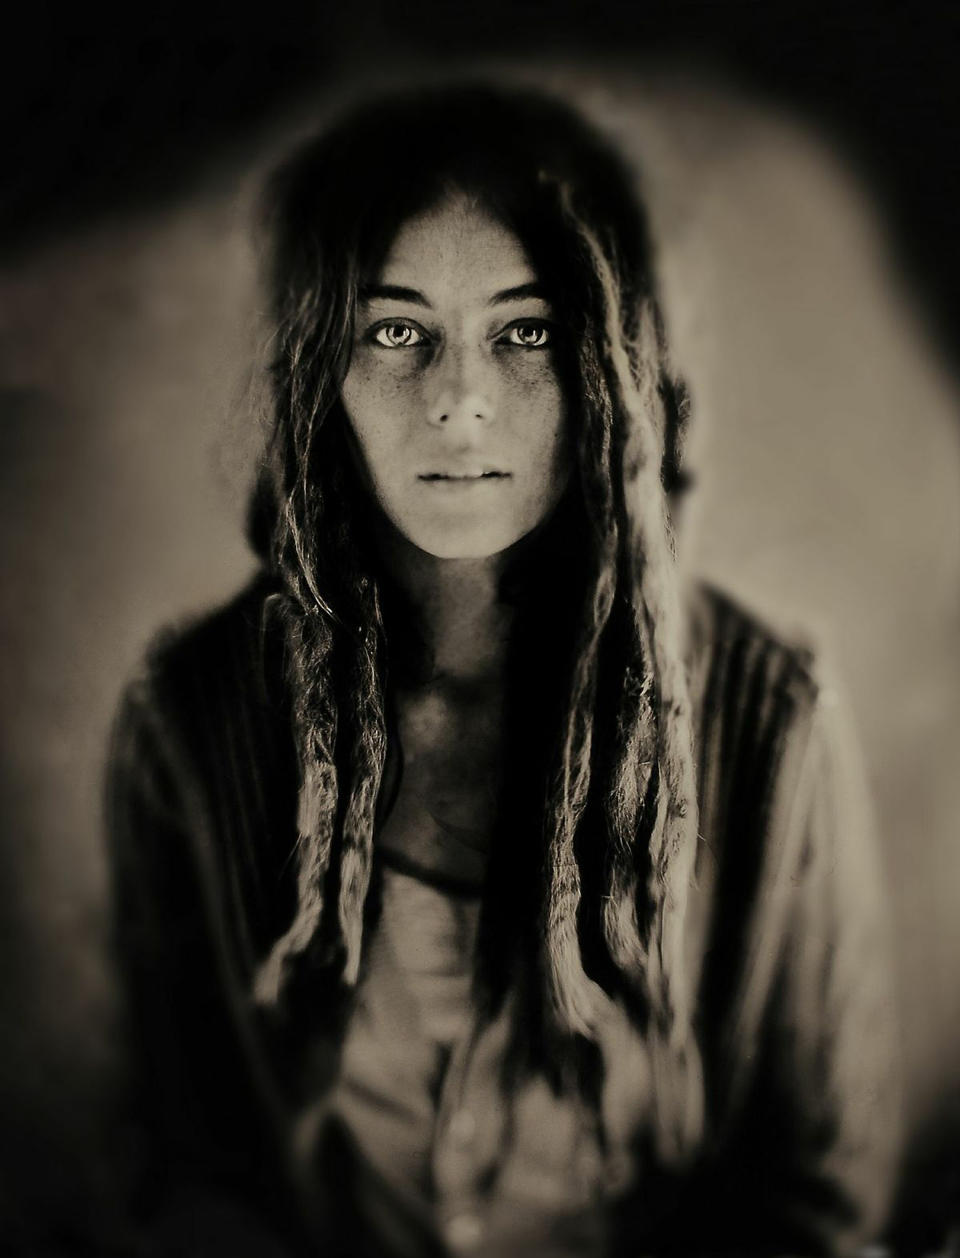 This 2011 photo provided by Studio Q shows "Kyleigh, Boulder, Colorado," in a wet plate collodion image made by Quinn Jacobson. Wet plate collodion photography, invented in 1851, has experienced a resurge in recent years as photographers turn to this antiquated method for its moody, even haunting, images. "The aesthetic is kind of a half-remembered dream," says Jacobson, a Denver photographer. (AP Photo/ Studio Q, Quinn Jacobson)